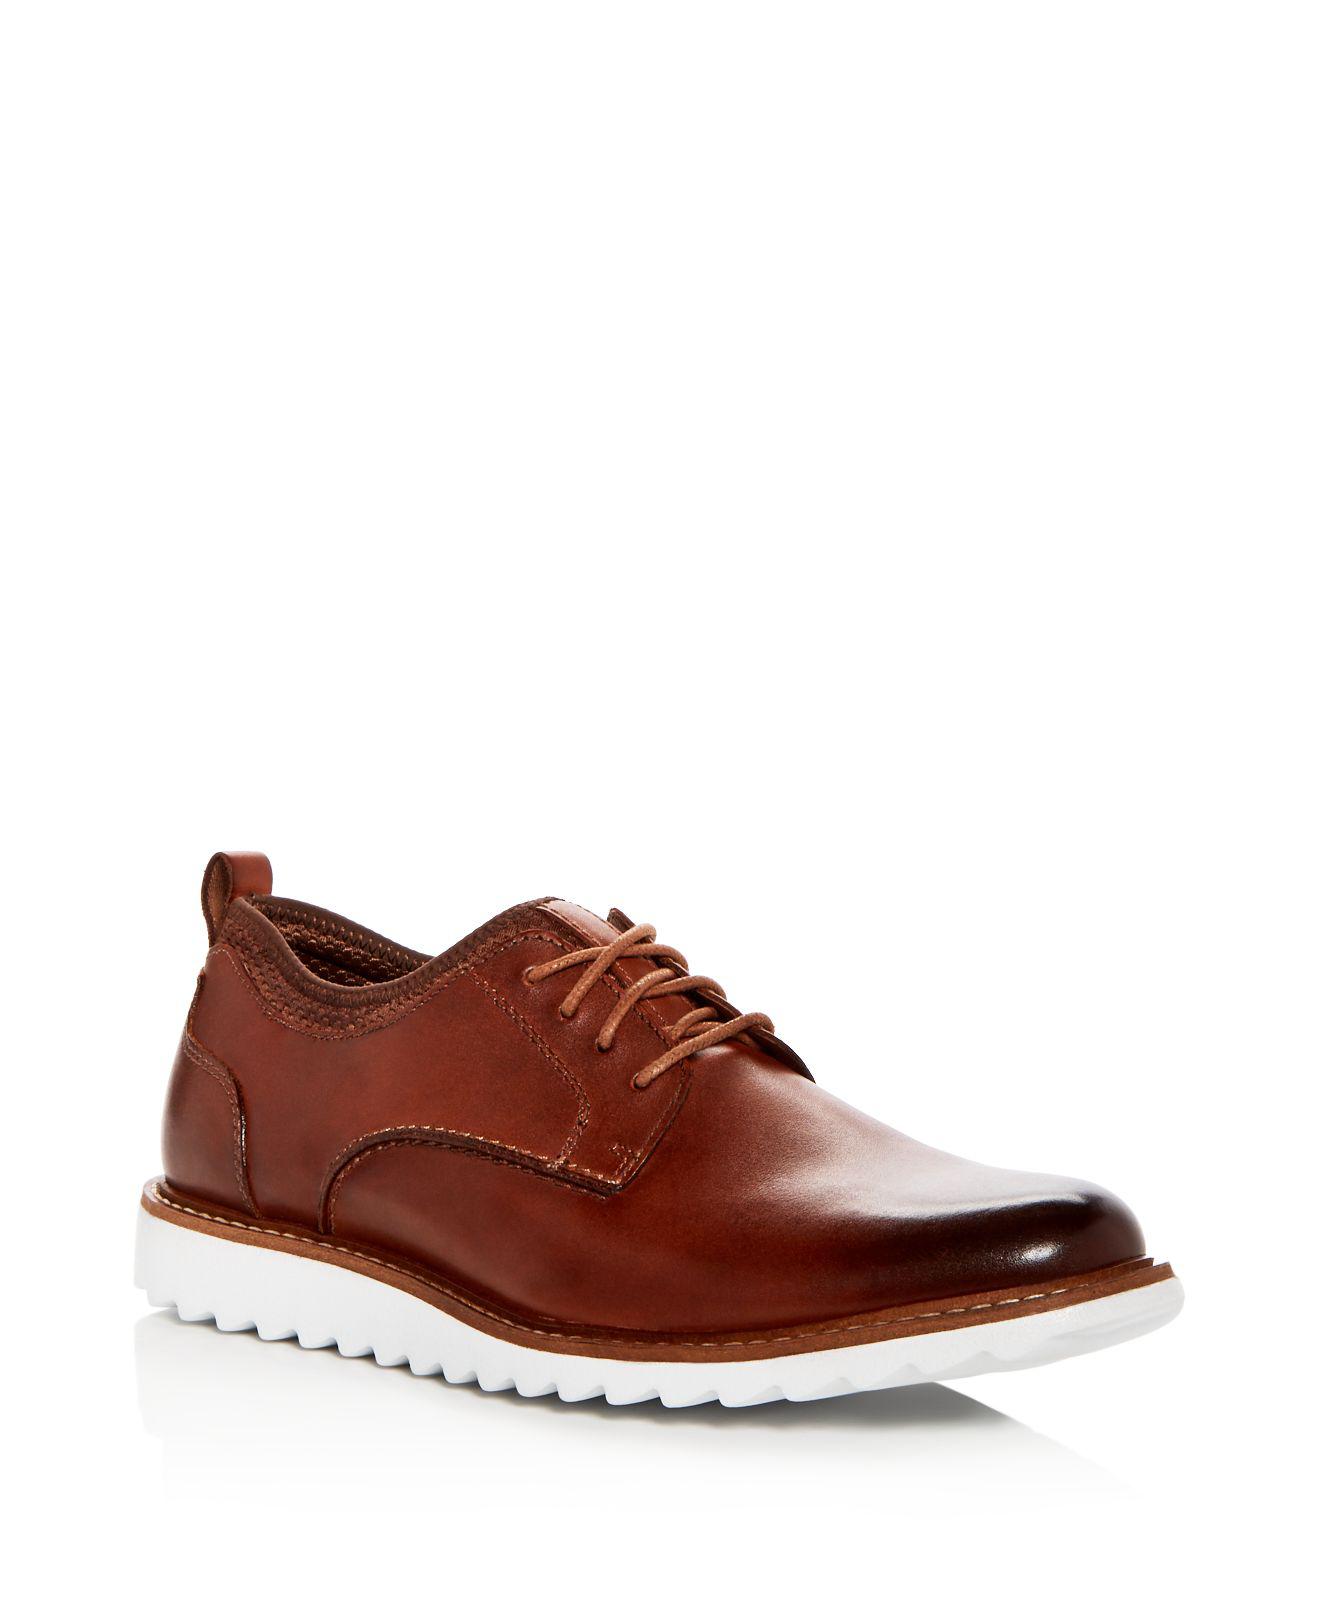 Lyst - G.h. bass & co. Men's Dirty Buck 2.0 Leather & Knit Oxfords in ...